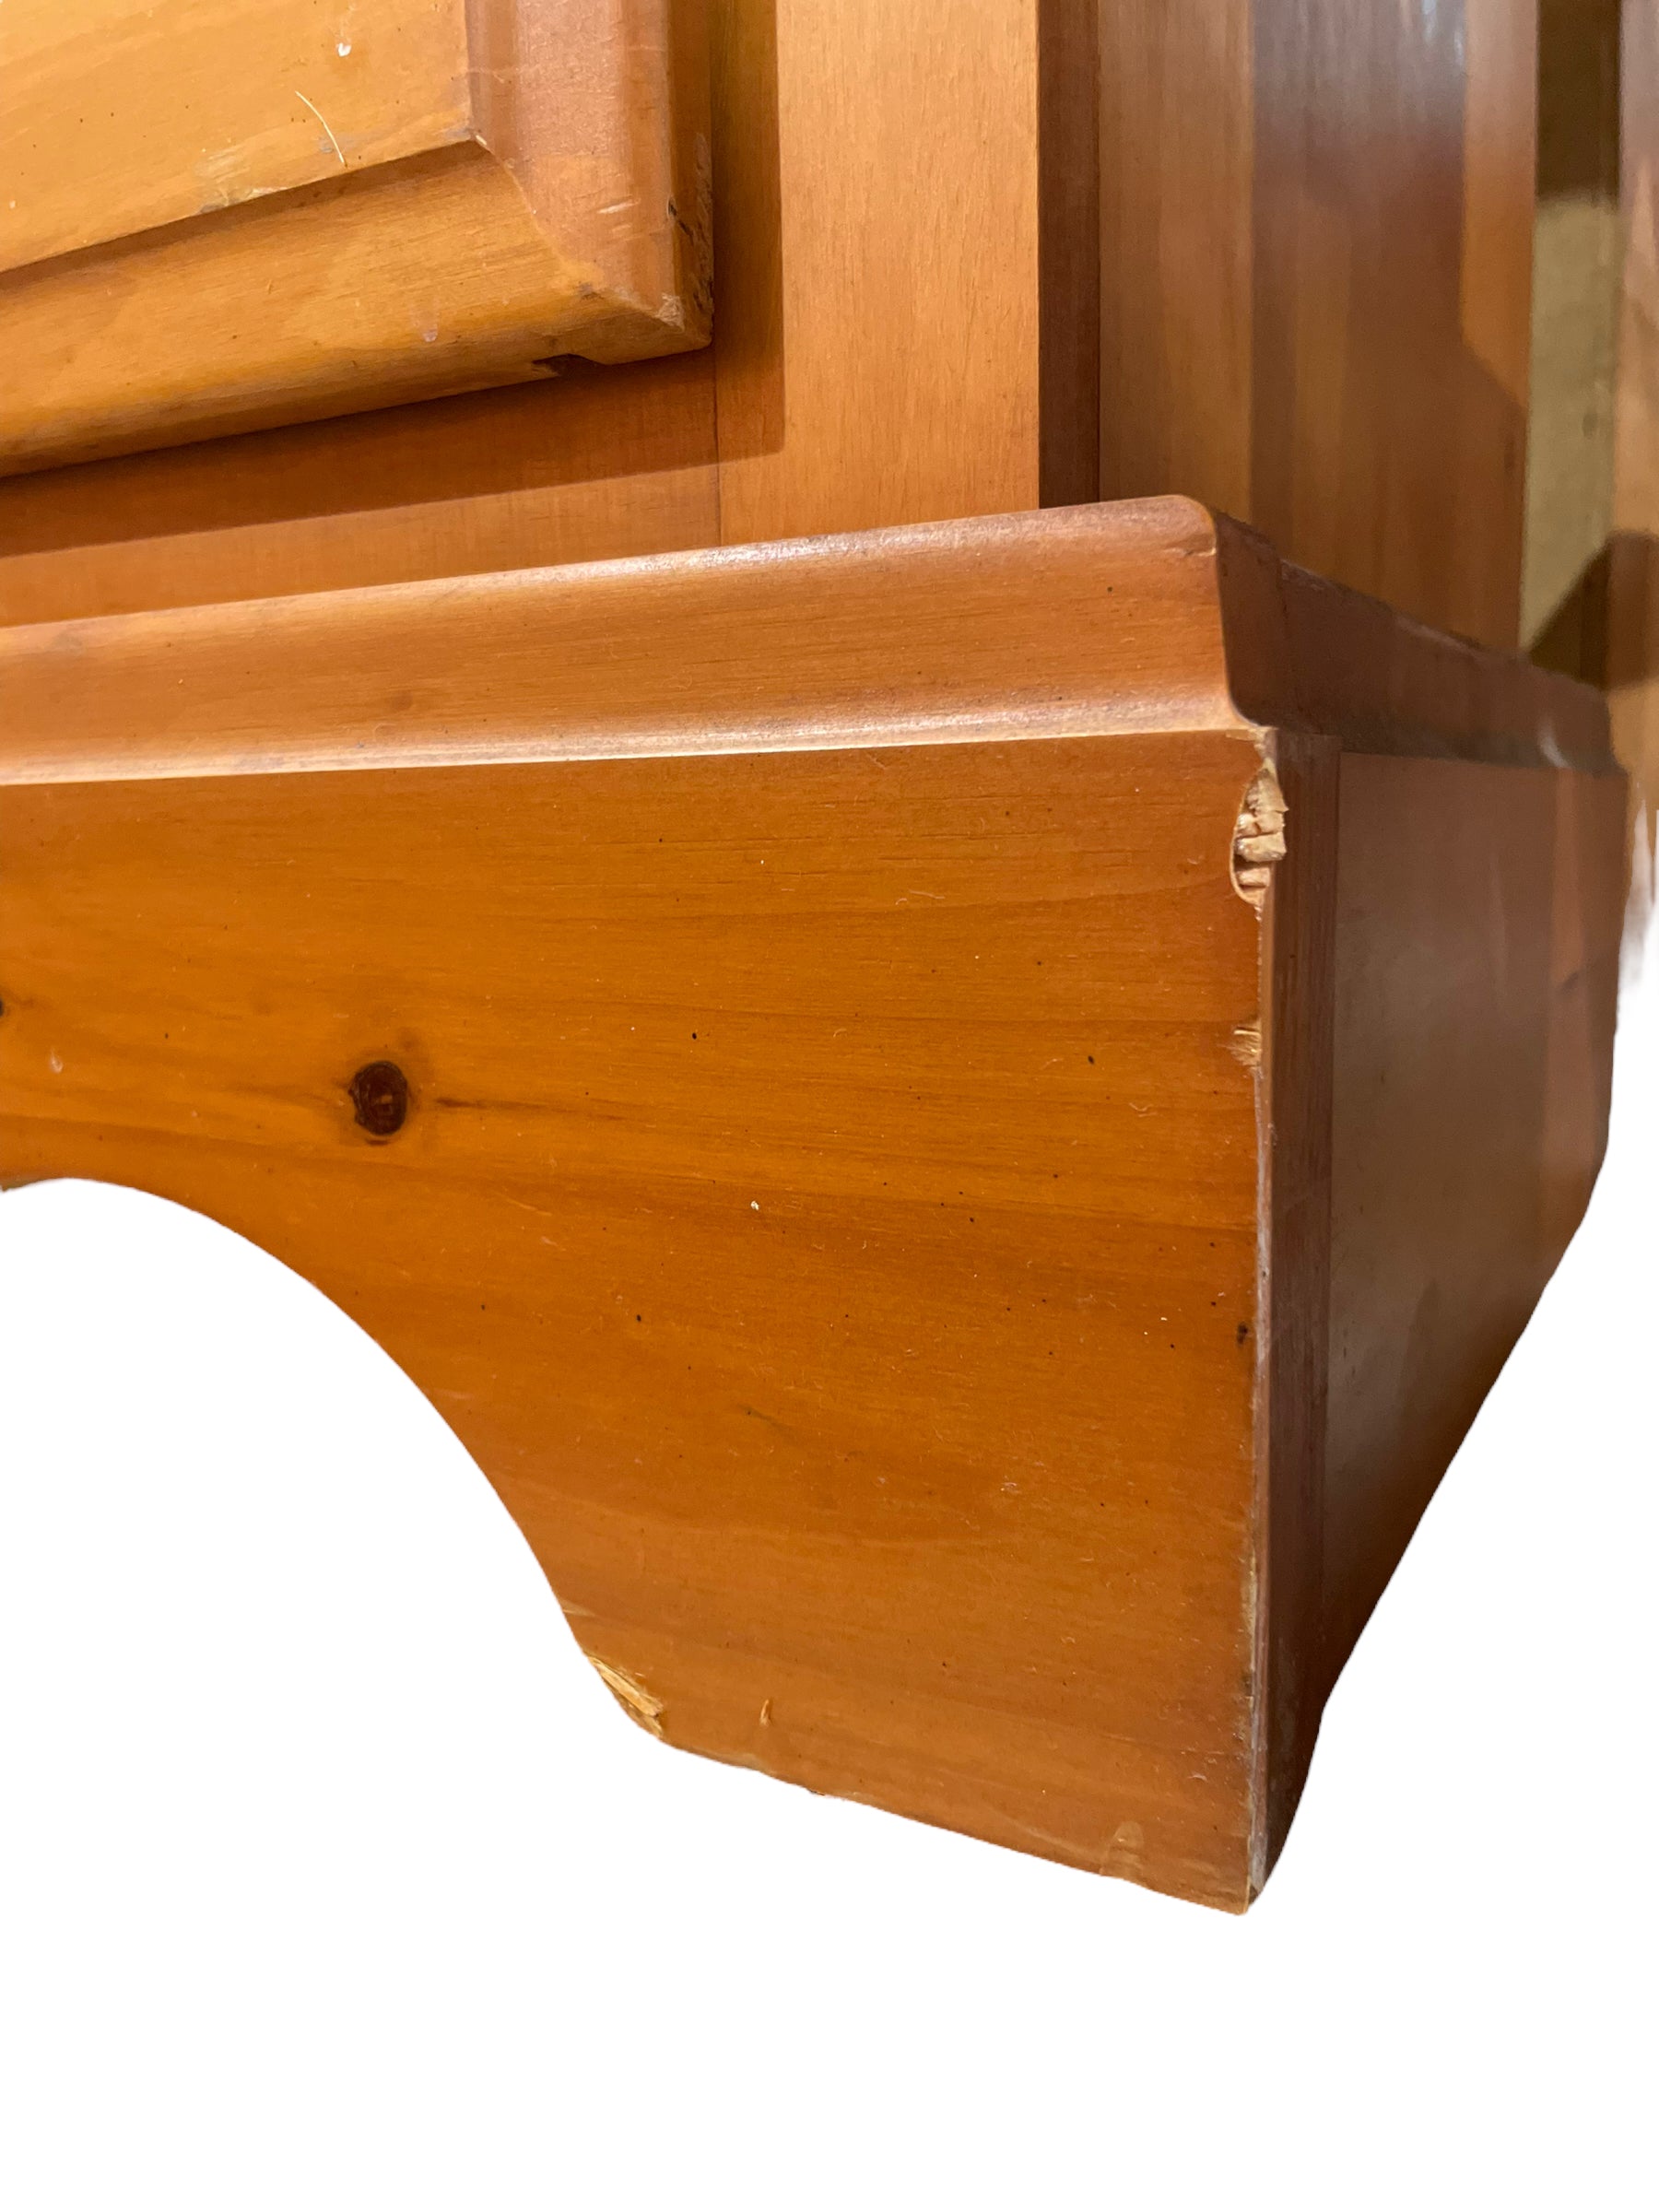 Two-Drawer Nightstand